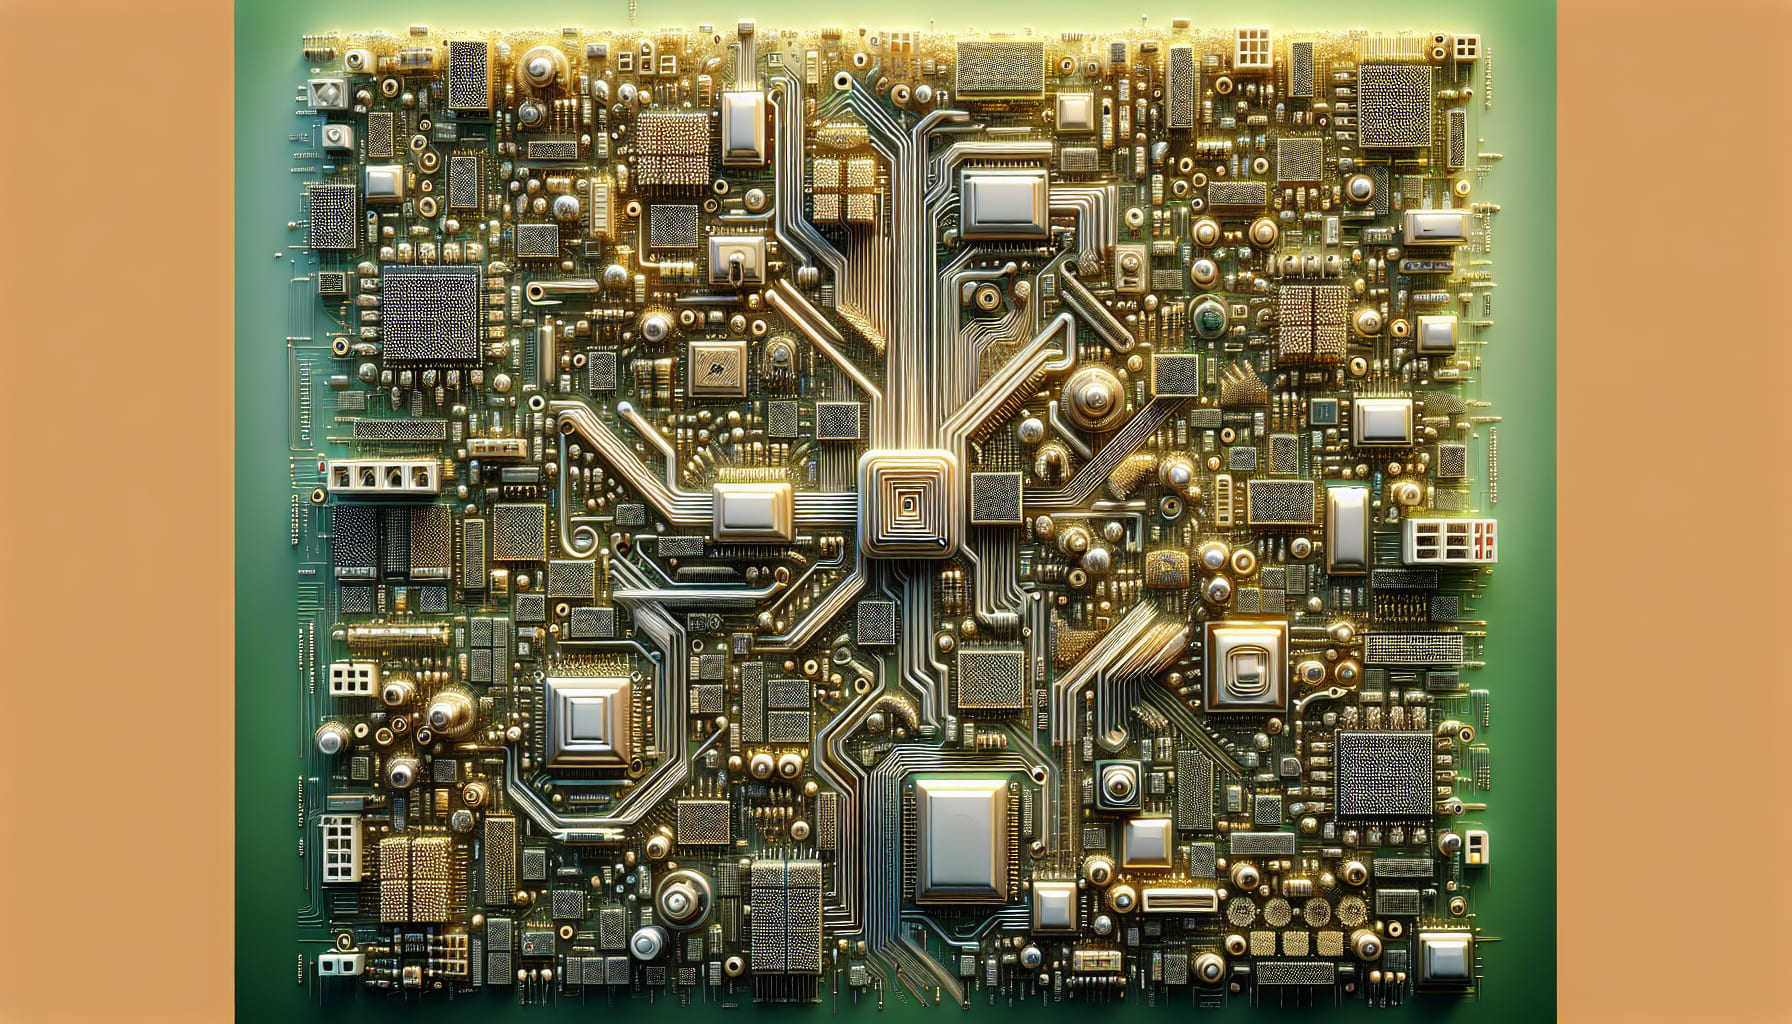 Innovative Custom Circuit Board Design Ideas for Your Projects - WriteUpCafe.com